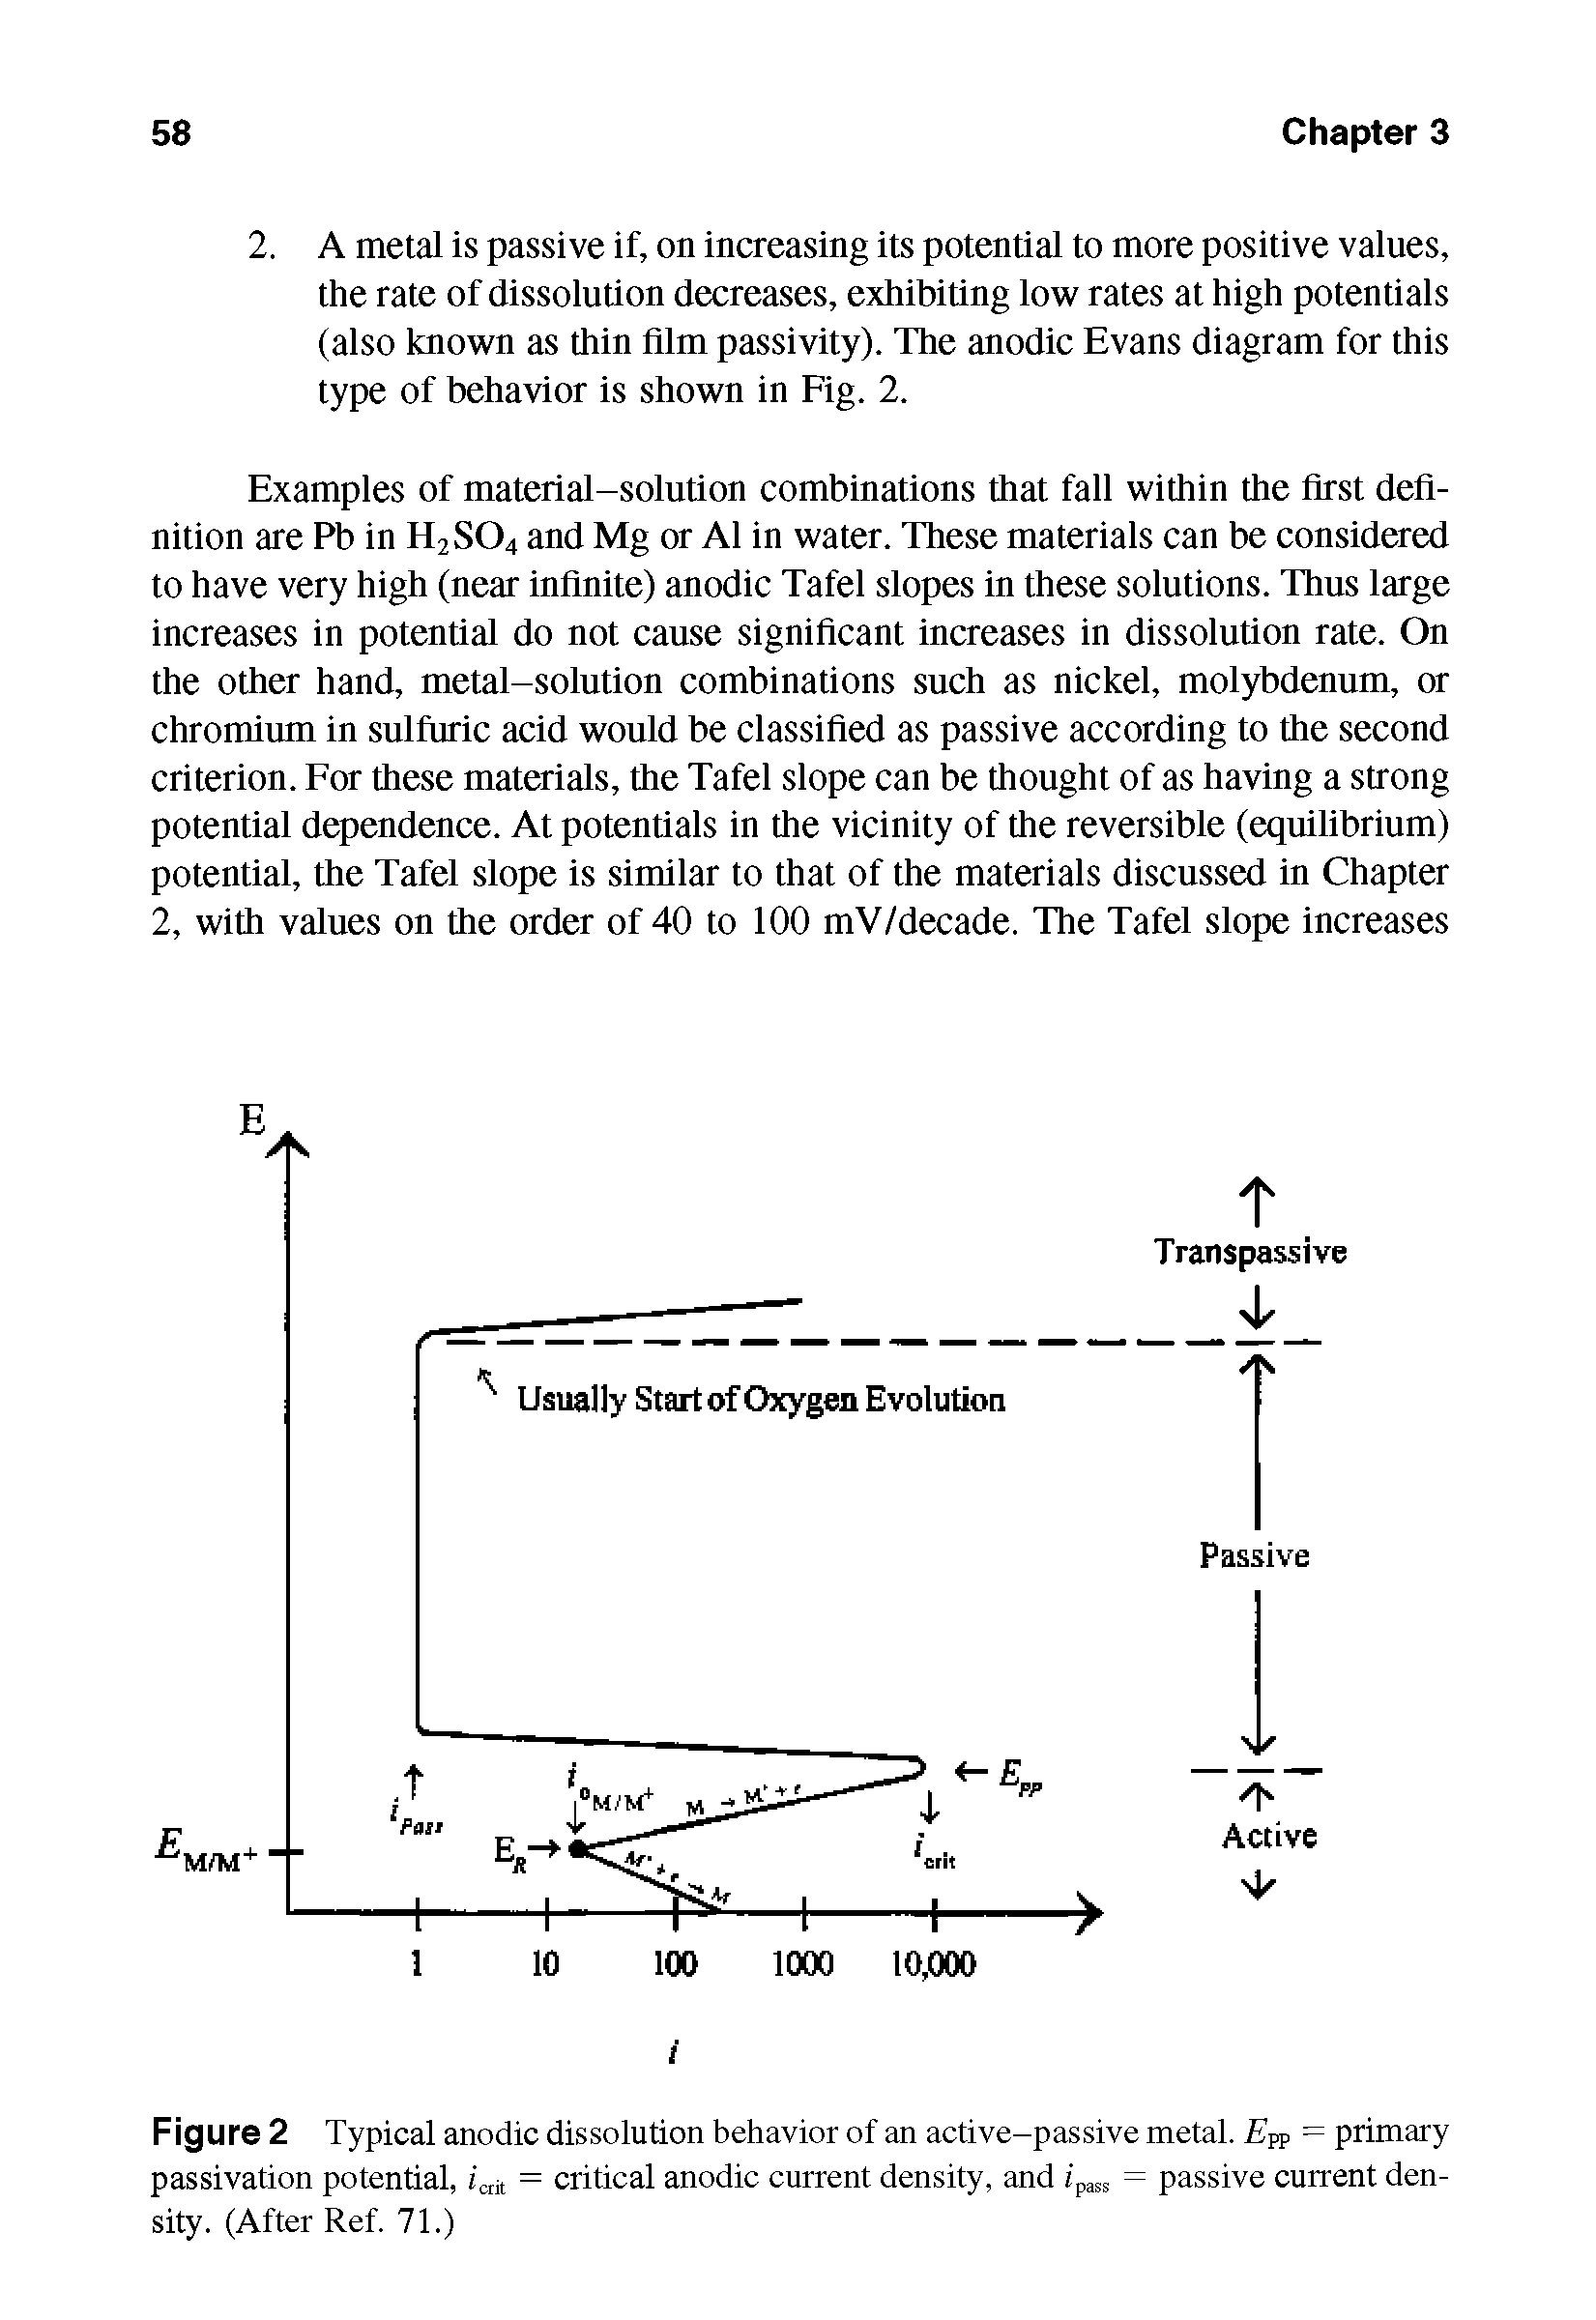 Figure 2 Typical anodic dissolution behavior of an active-passive metal. ZJpp = primary passivation potential, iait = critical anodic current density, and ipass = passive current density. (After Ref. 71.)...